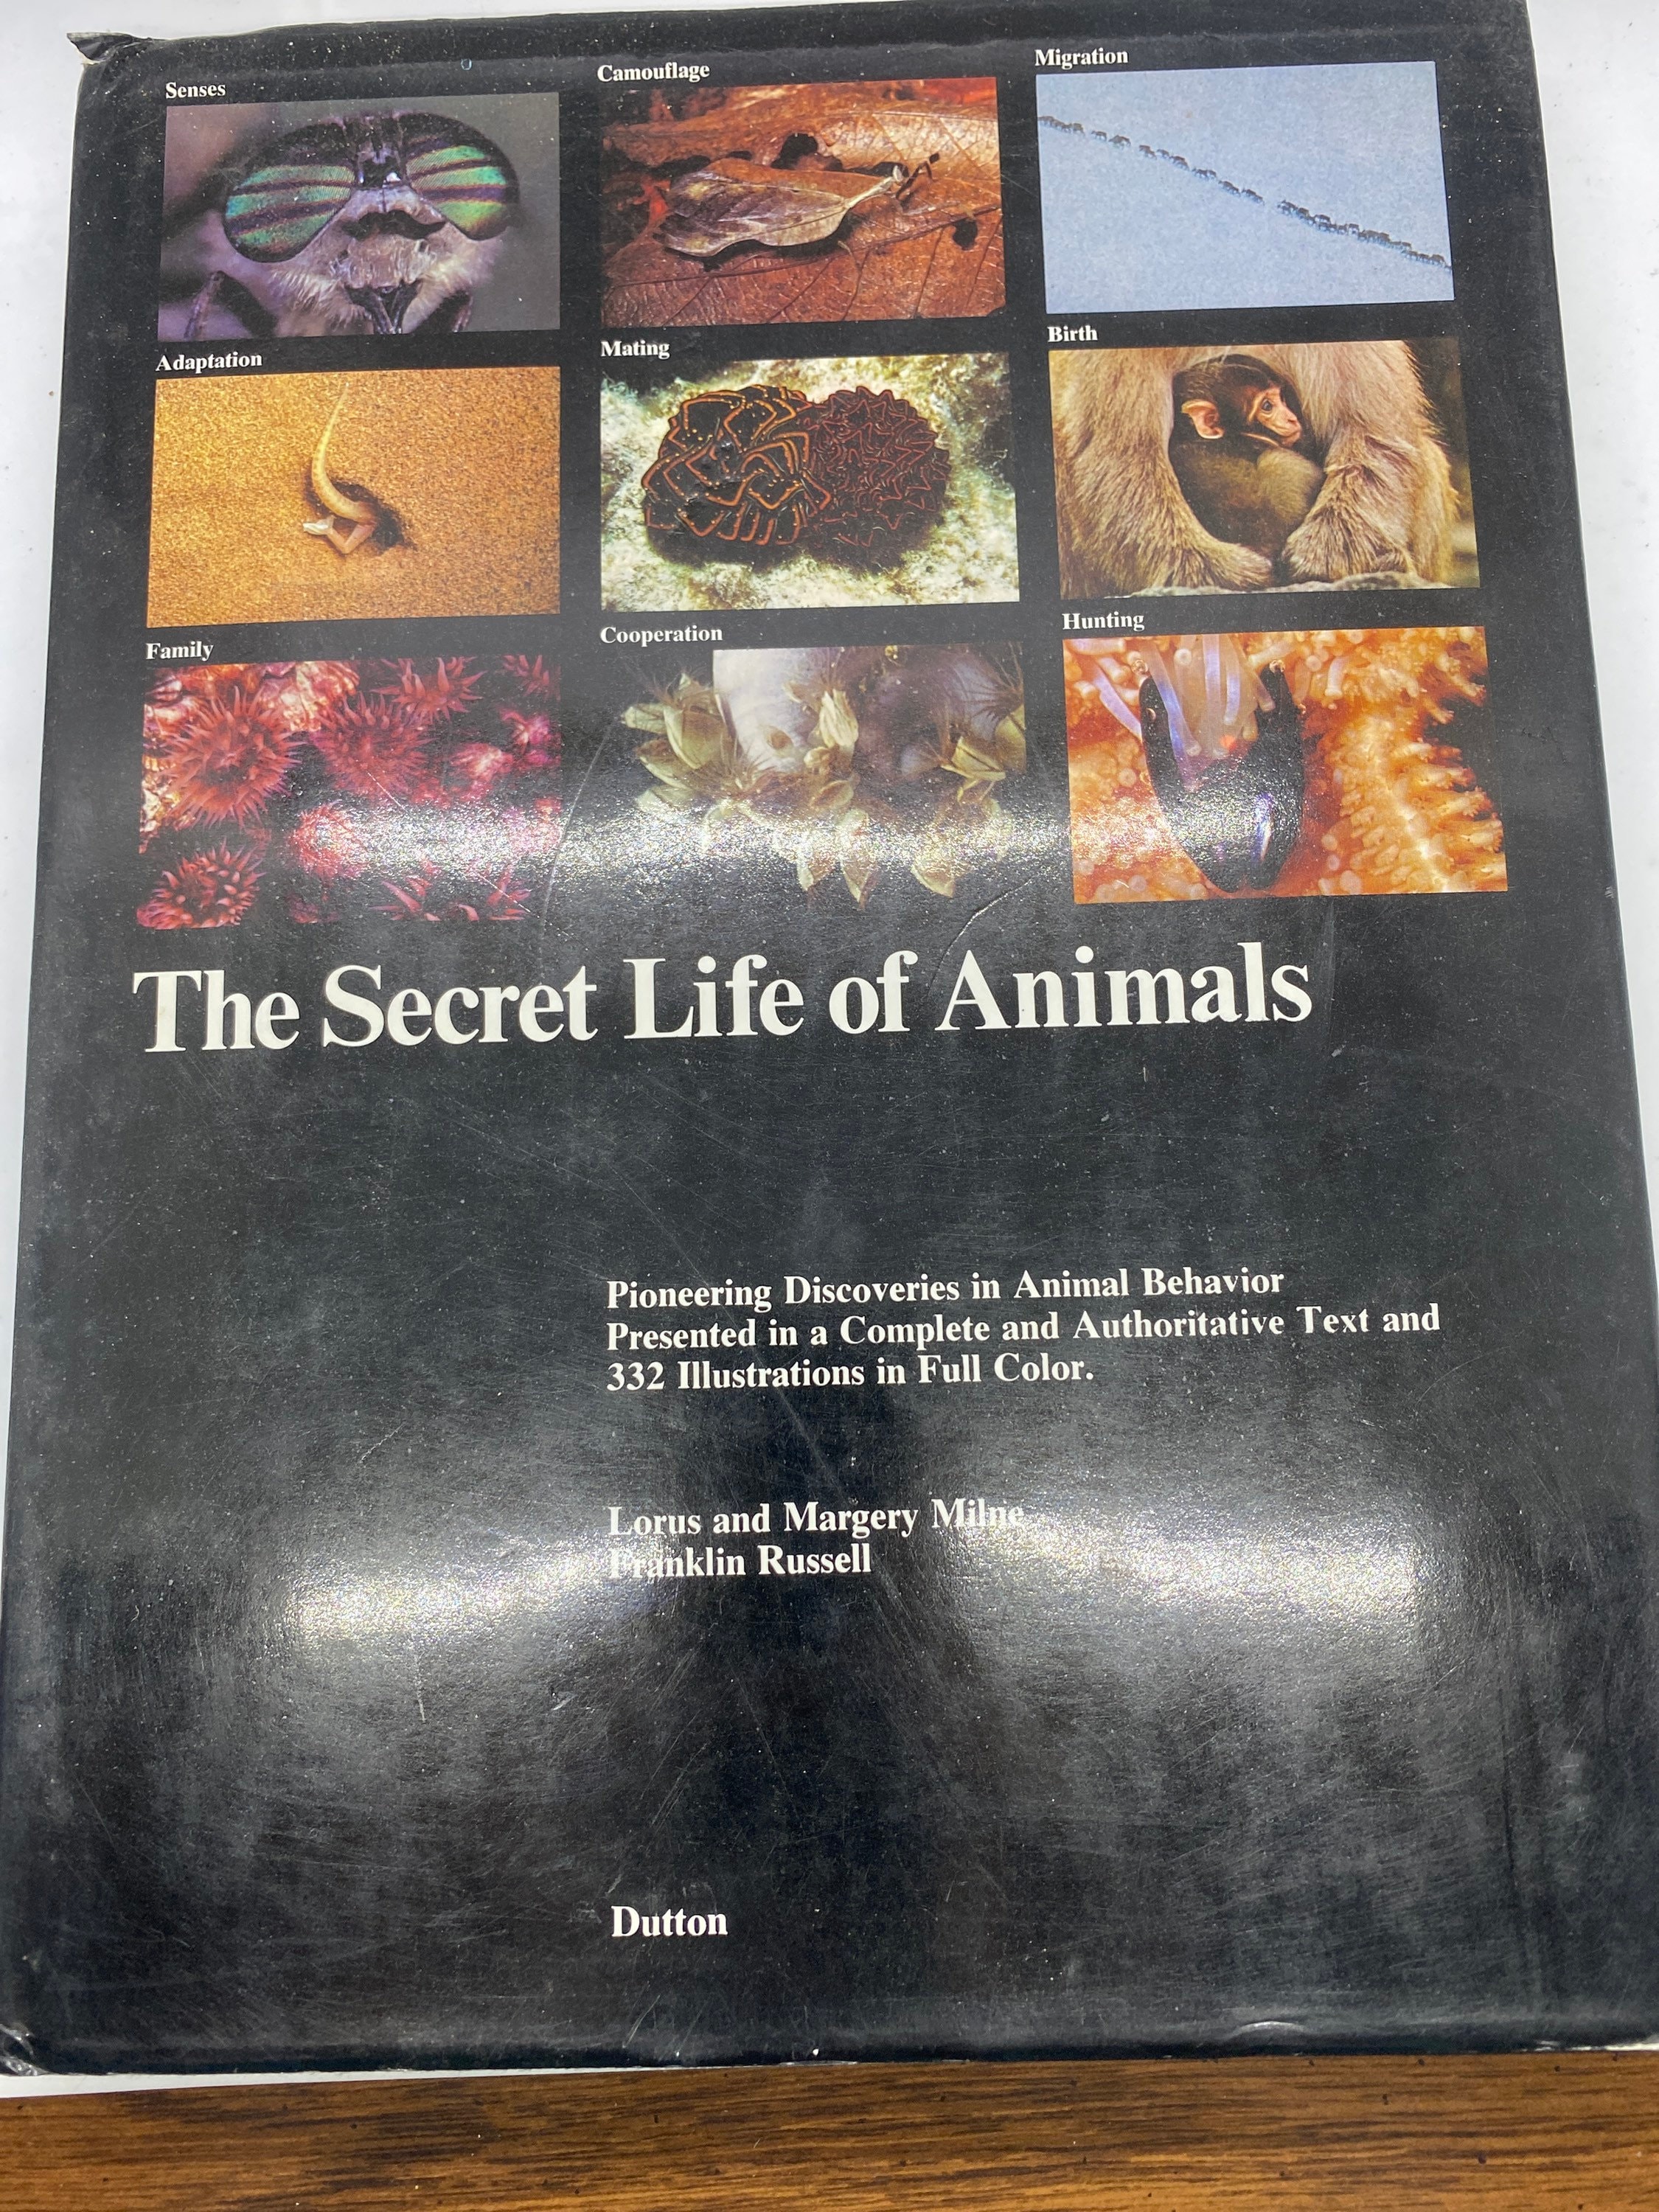 The Secret Life of Animals: Pioneering Discoveries in Animal - Etsy